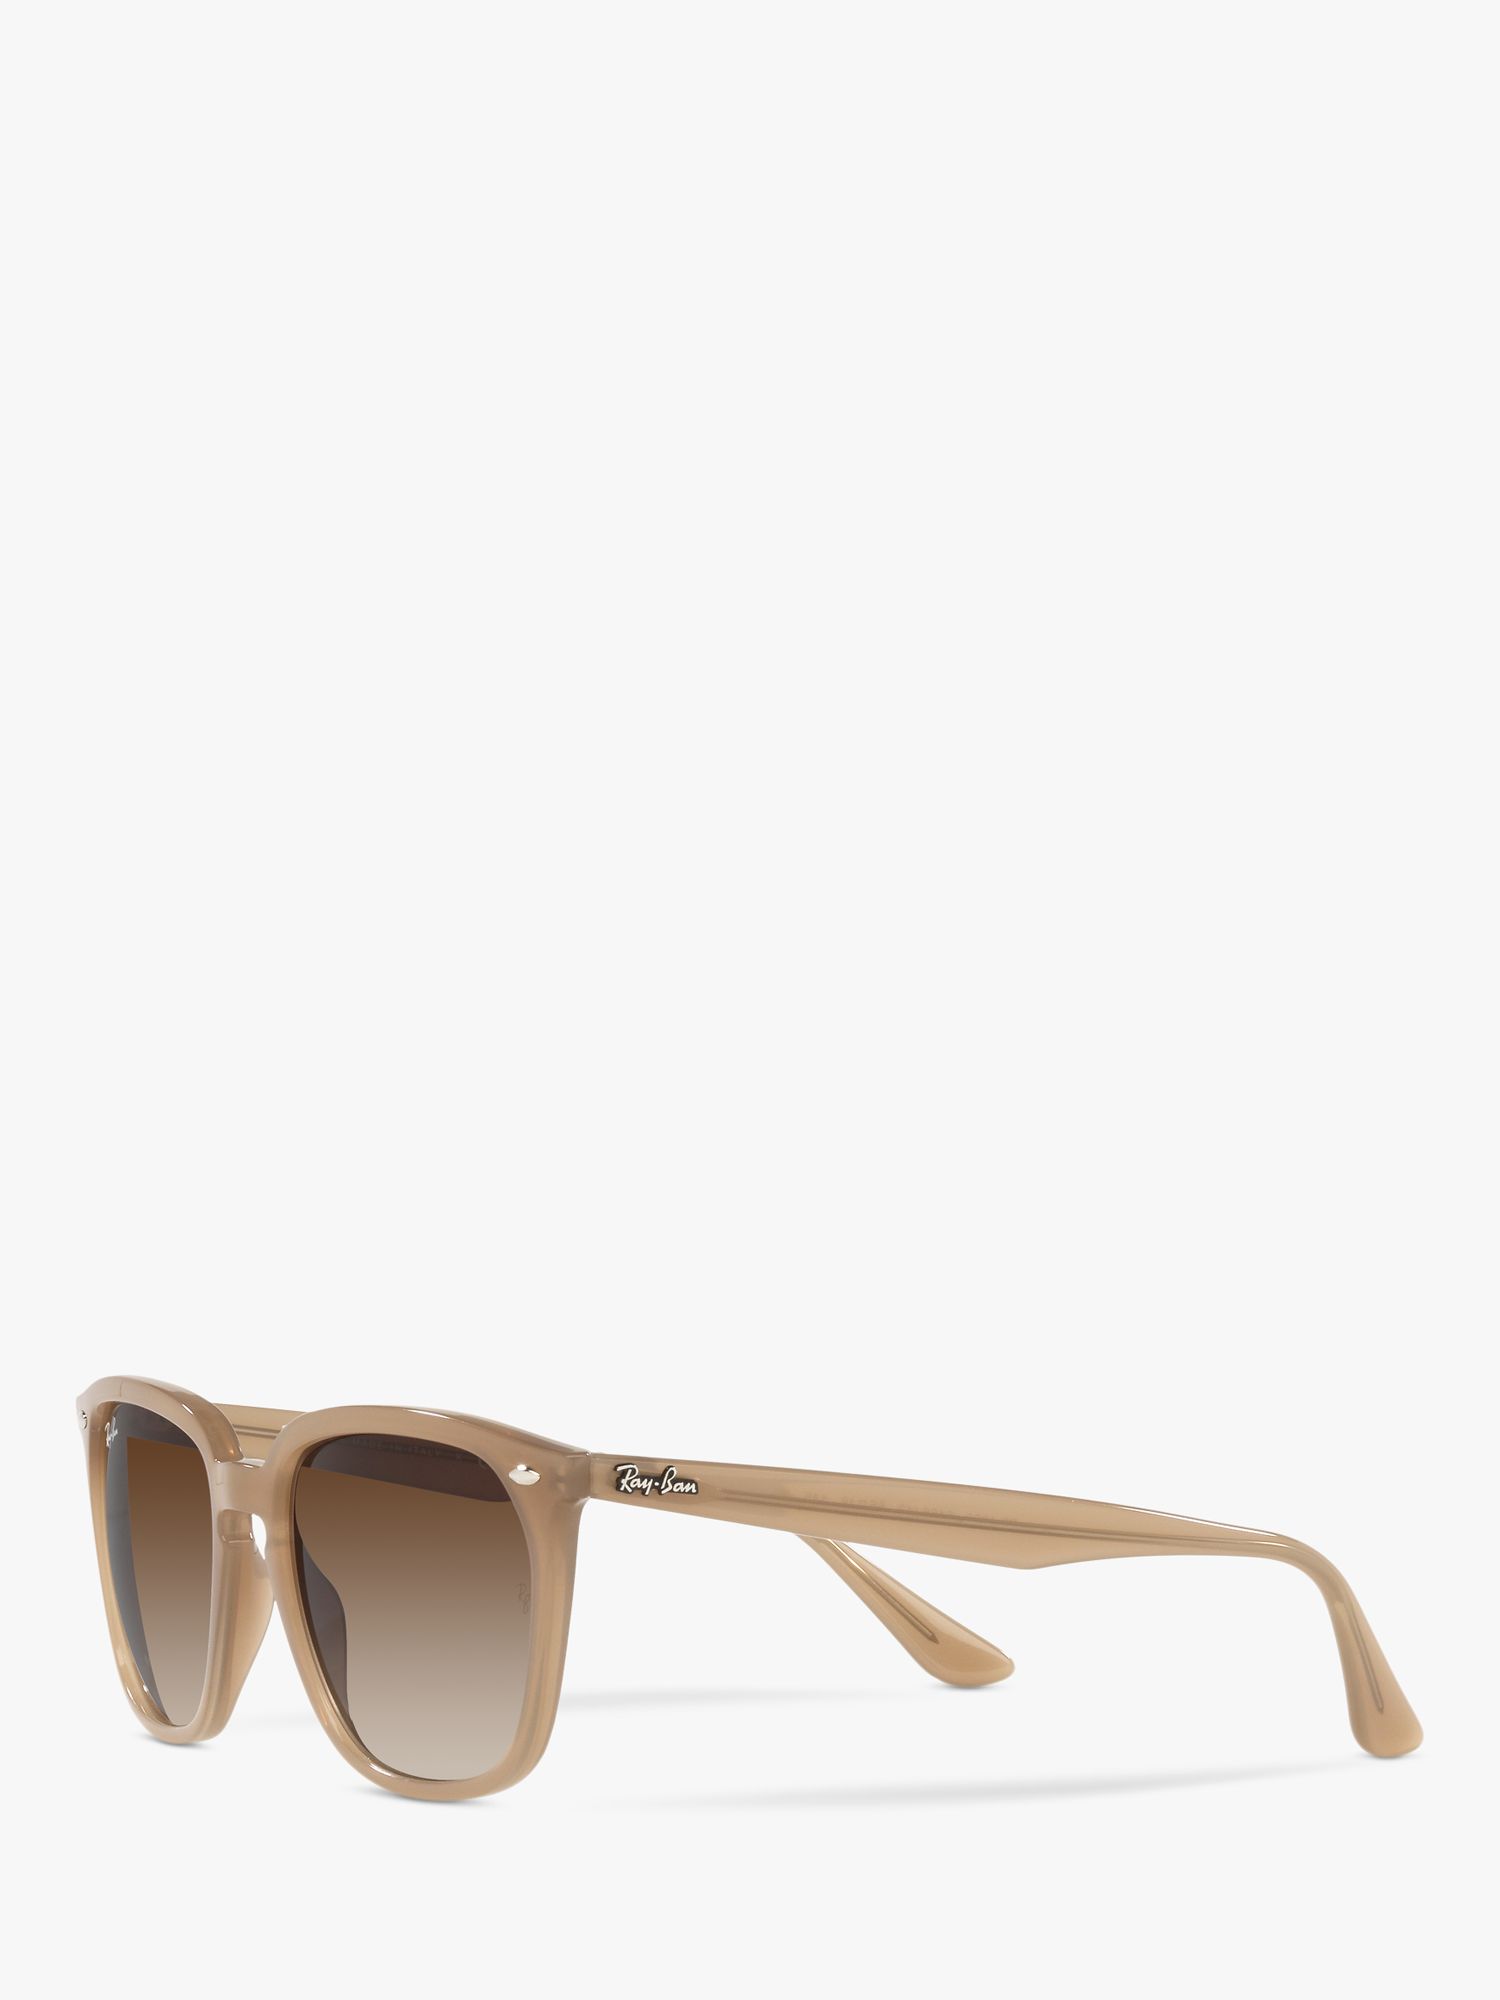 Ray-Ban RB4362 Unisex Square Sunglasses, Light Brown/Brown Gradient at John  Lewis & Partners